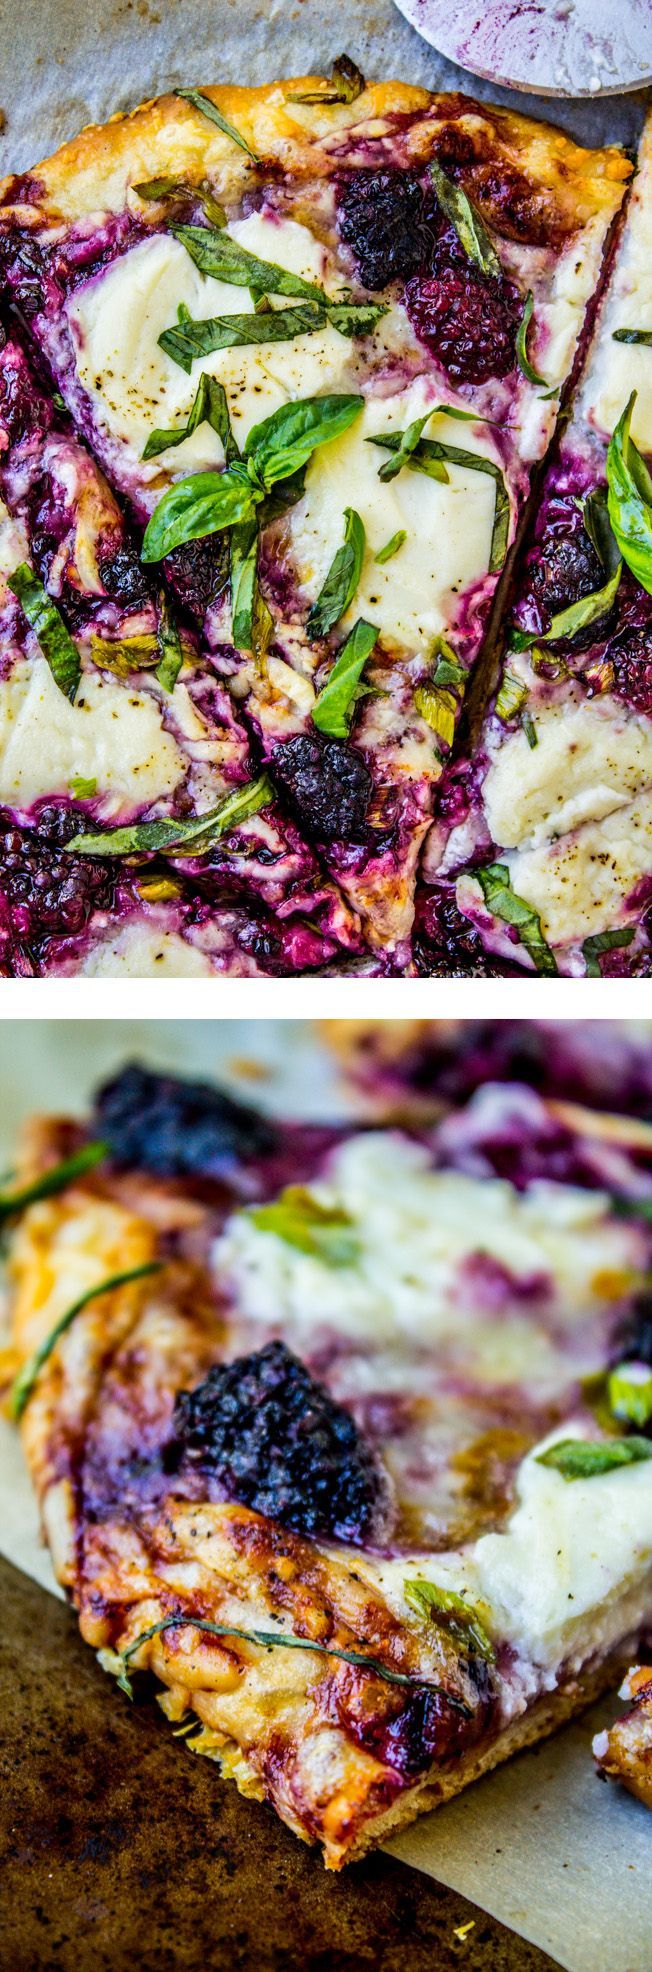 Blackberry Ricotta Pizza with Basil from The Food Charlatan // The perfect EASY summer pizza!